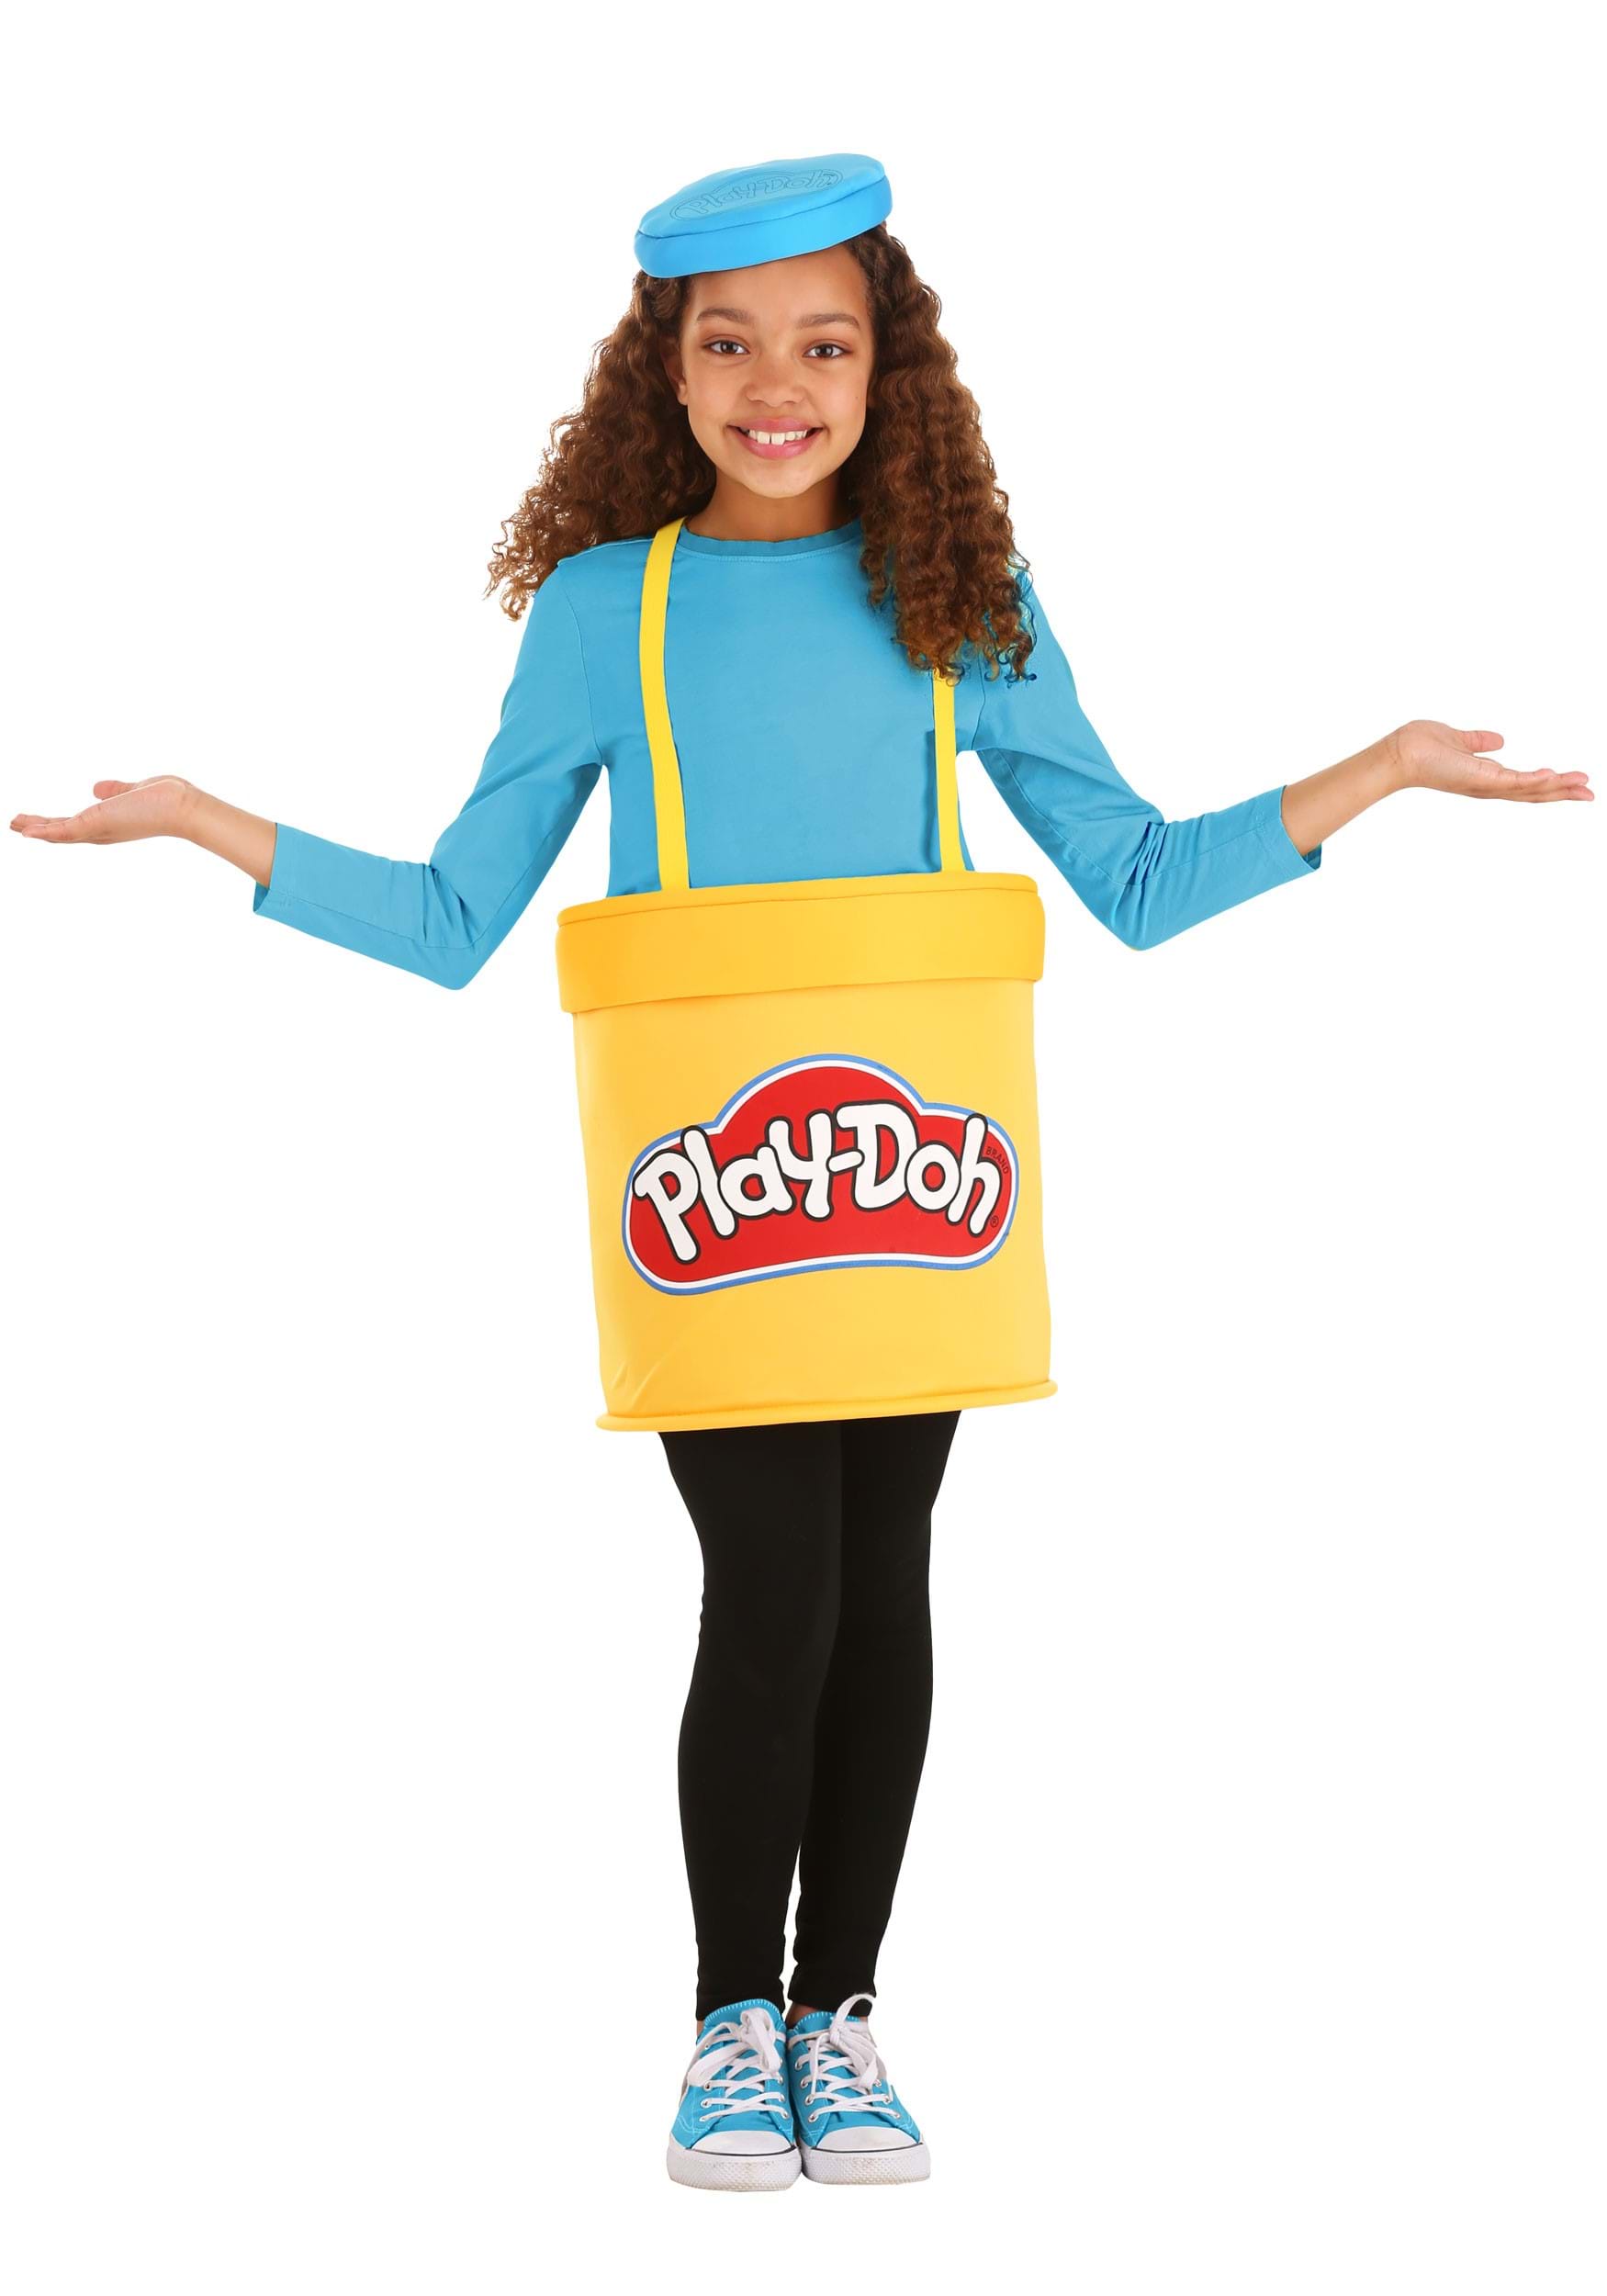 Photos - Fancy Dress Hasbro Play-Doh Kid's Costume | Toys & Crafts Halloween Costumes Red/B 